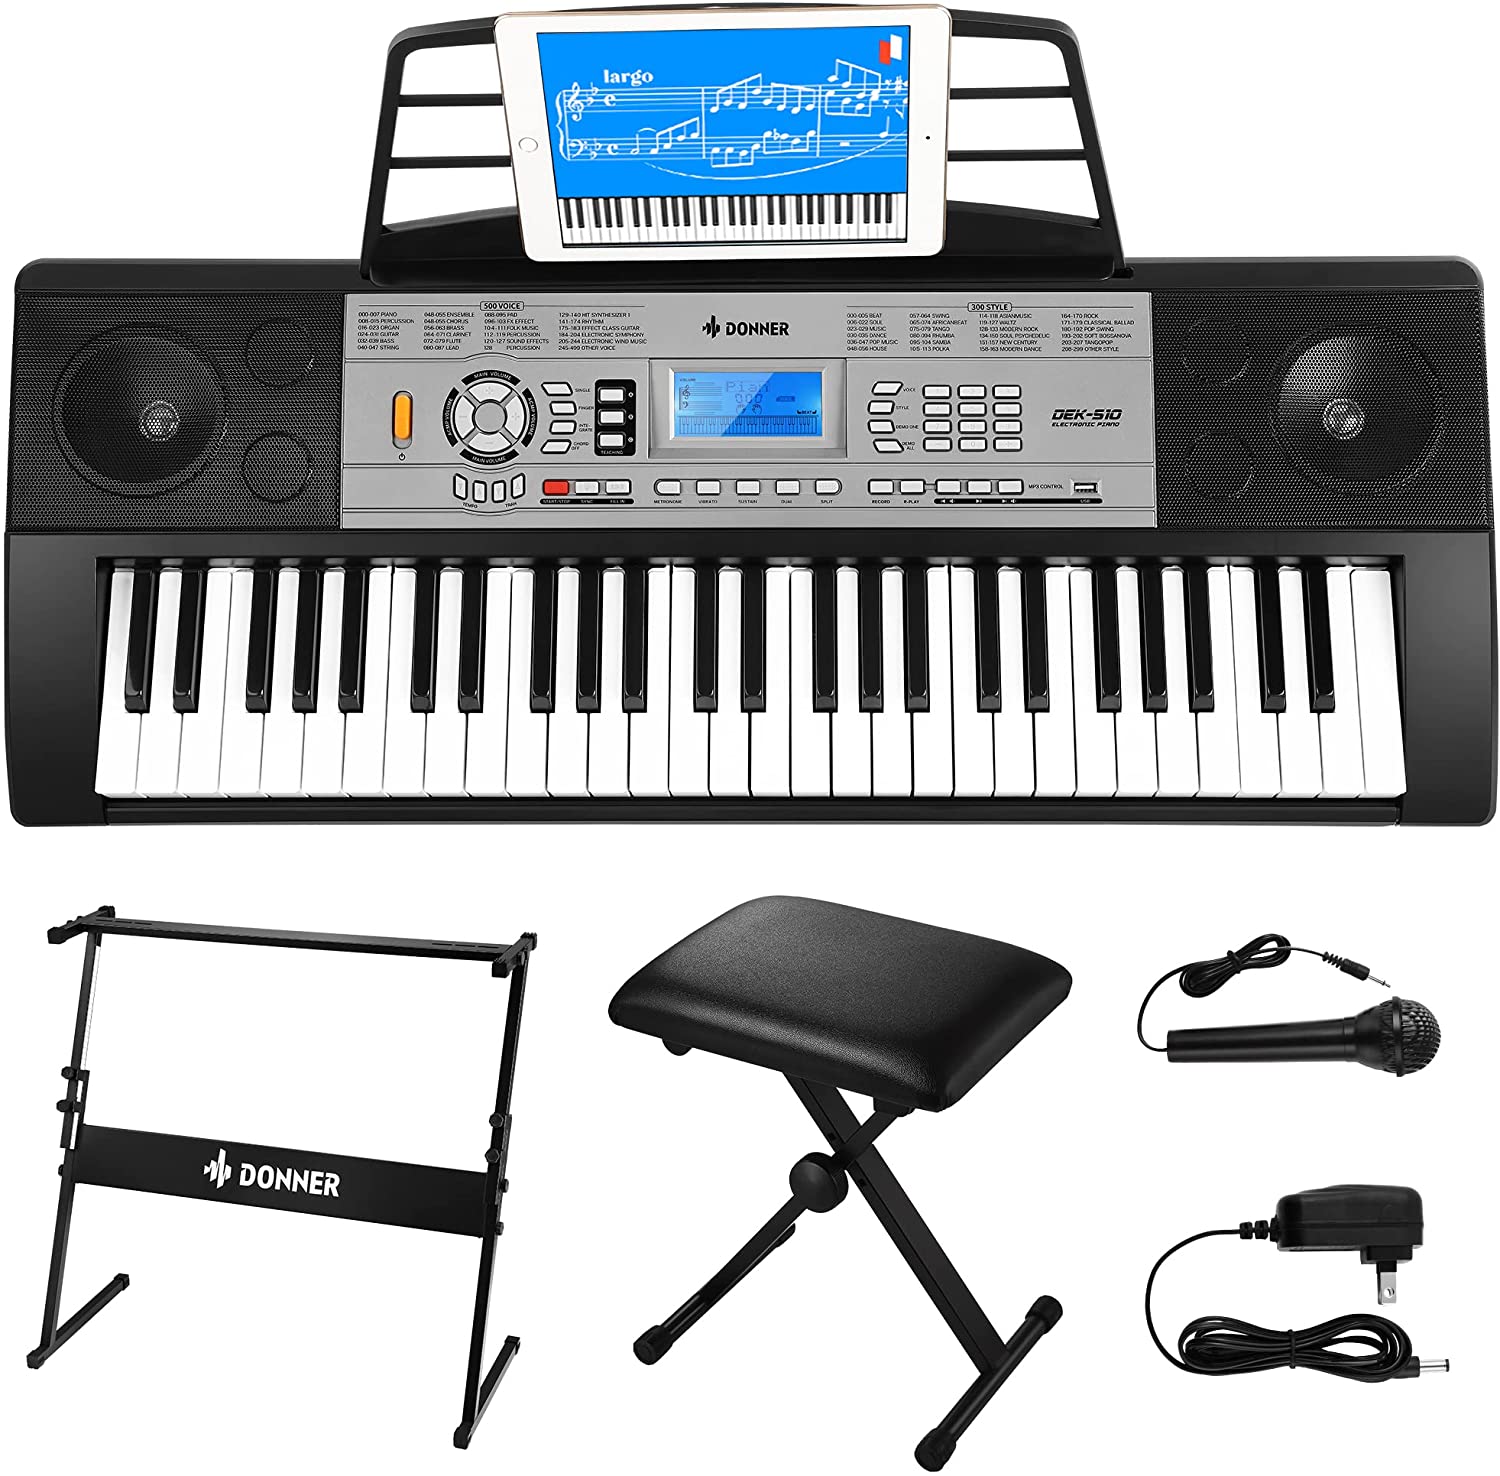 

Donner DEK-510 54-Key Electronic Keyboard Kit with Bench/Microphone/Power Supply/Stand/Sustain Pedal